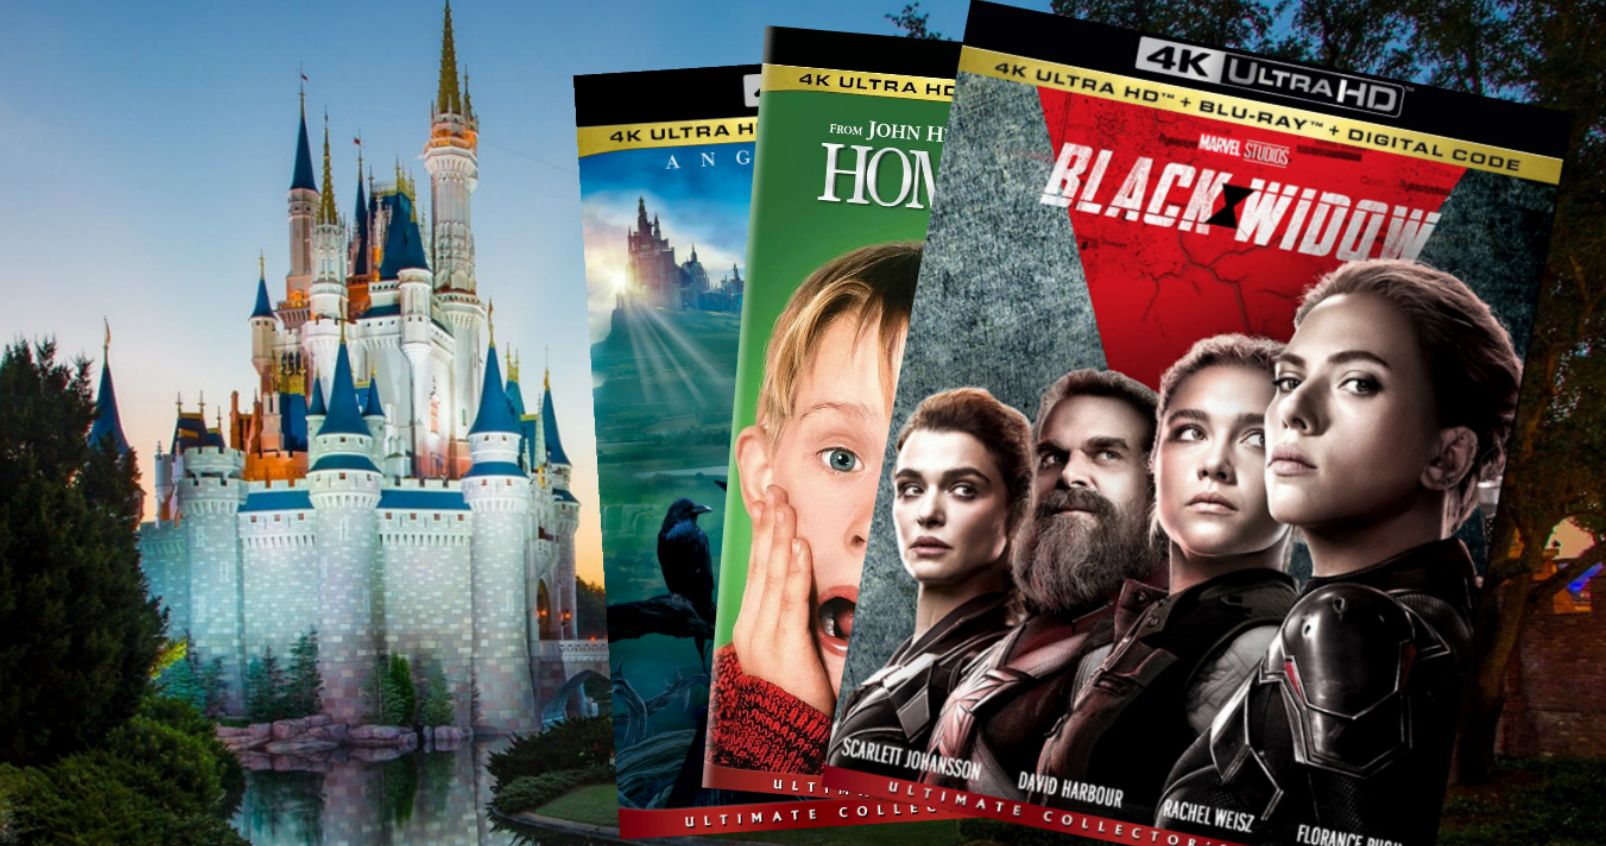 Physical Media's Future Is 4K Blu-ray, Studios and Directors Agree